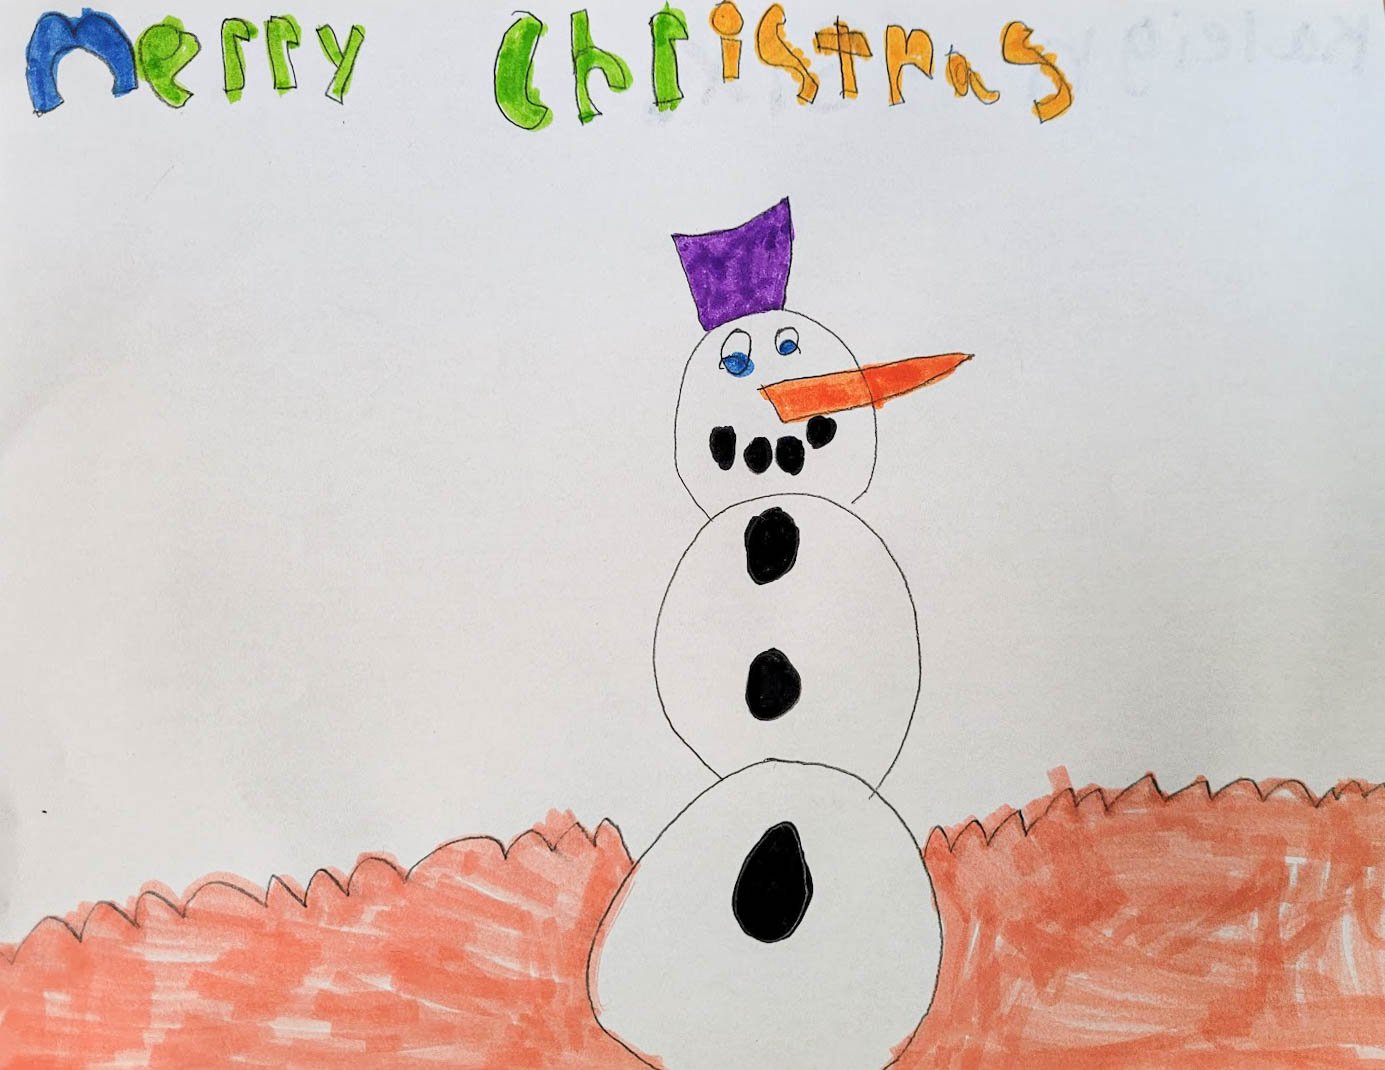 Artwork by Kayleigh, Age 6 from Chipman